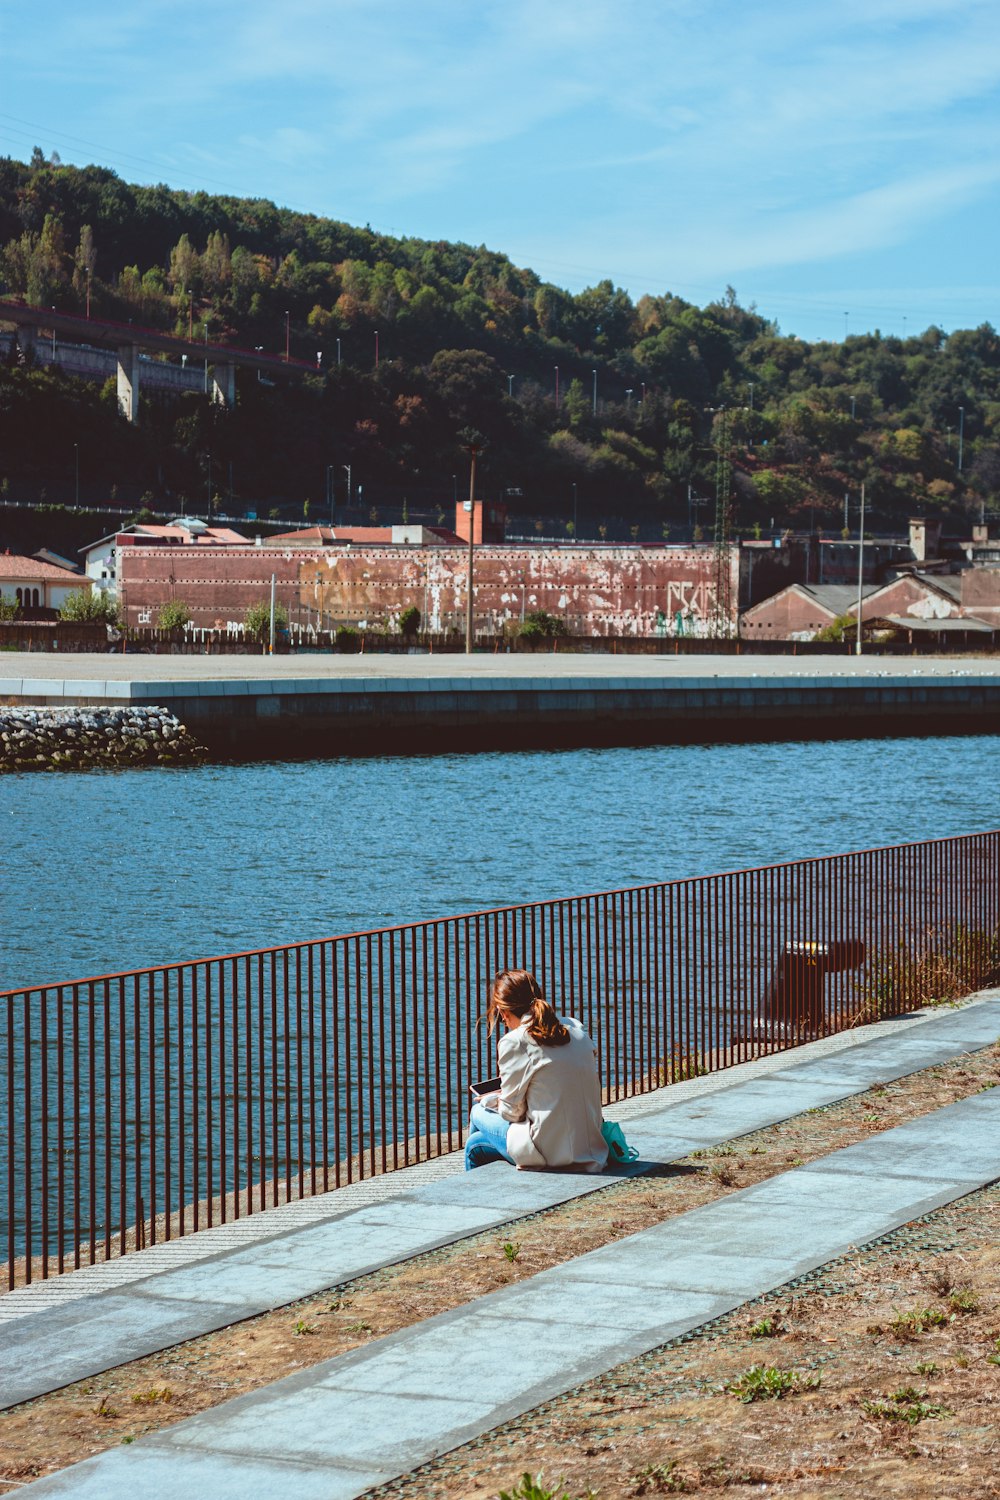 a woman sitting on a sidewalk next to a body of water